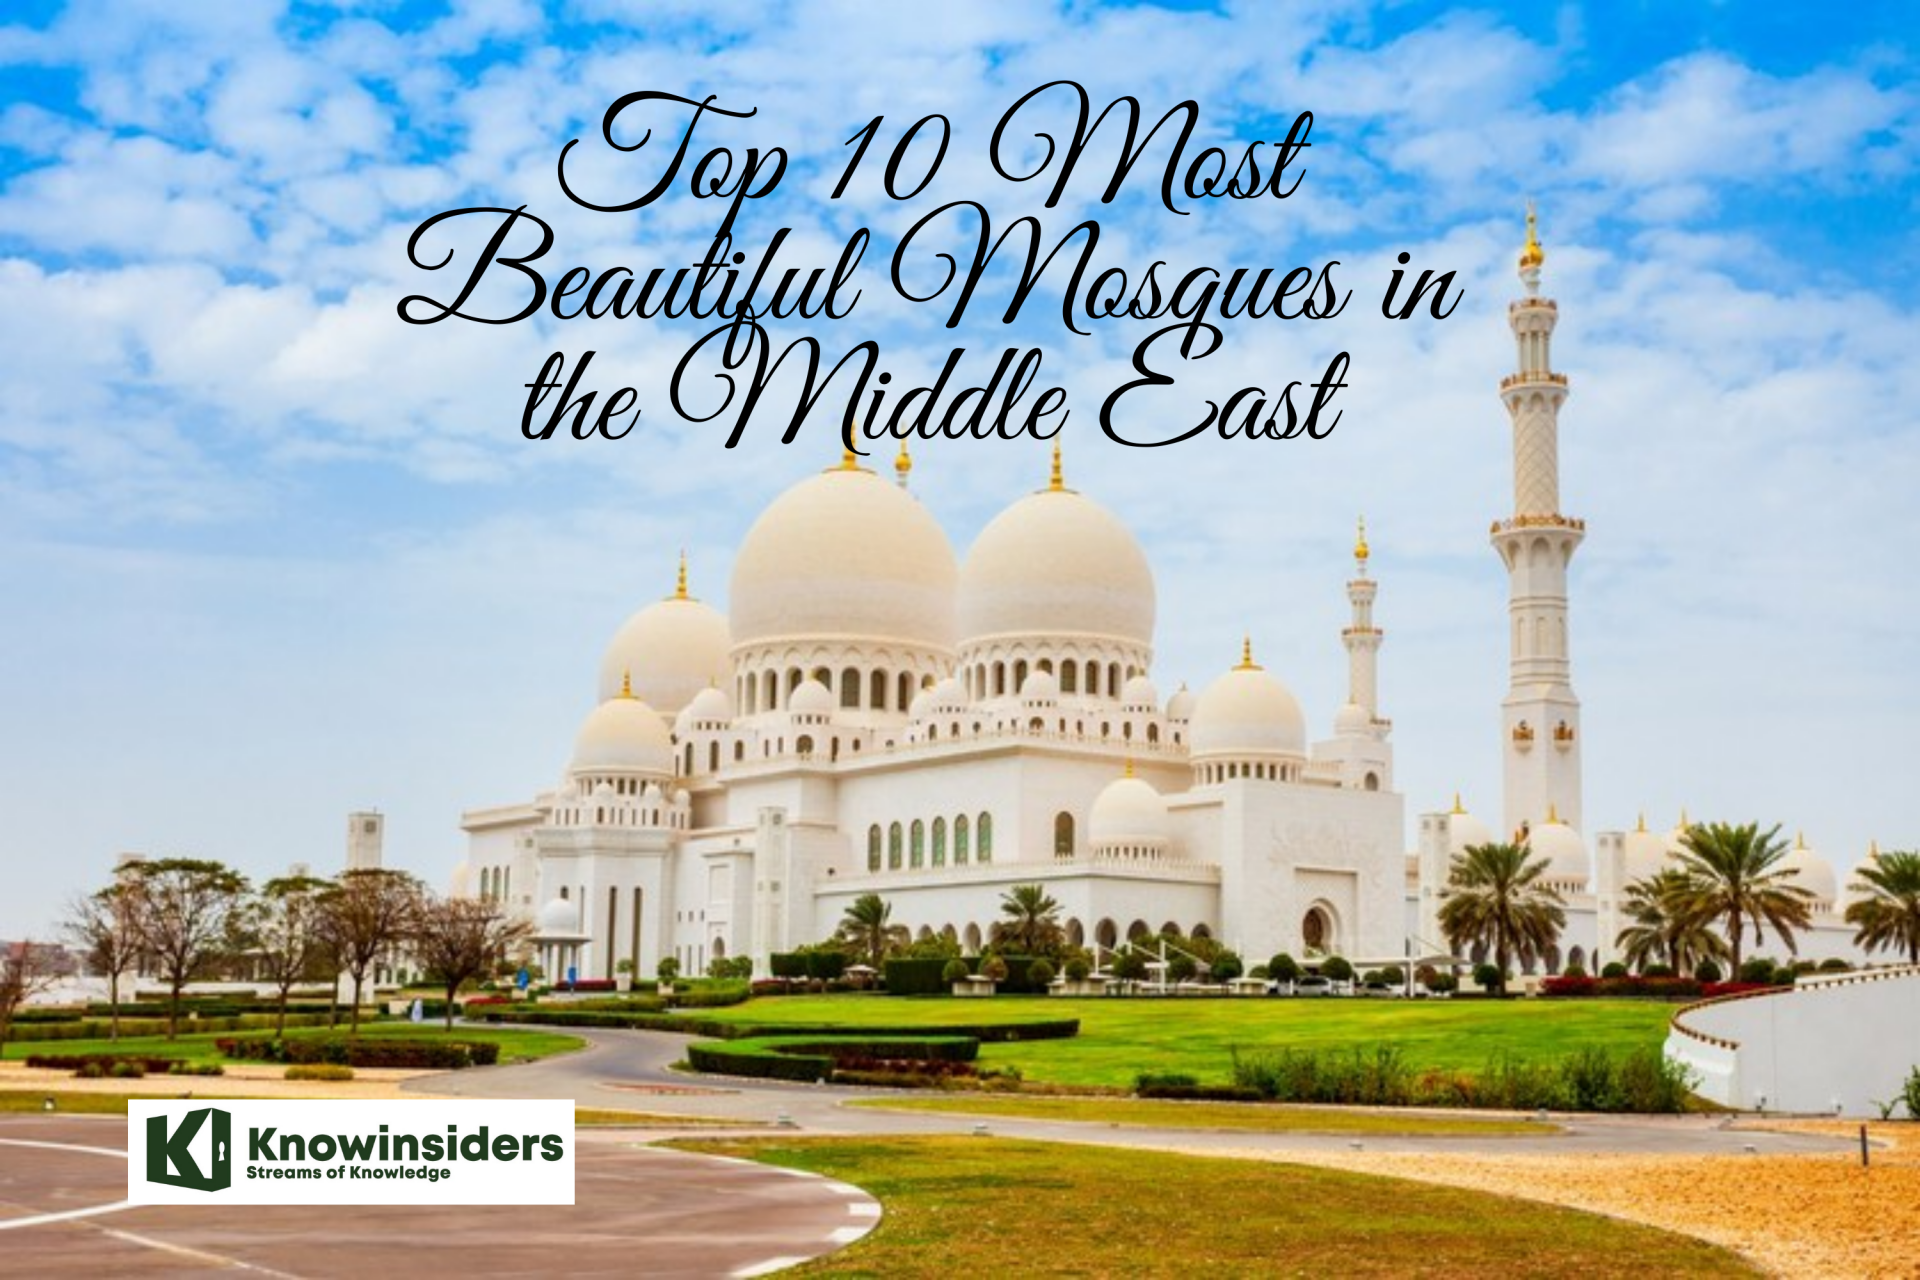 Top 10 Most Beautiful Mosques in the Middle East